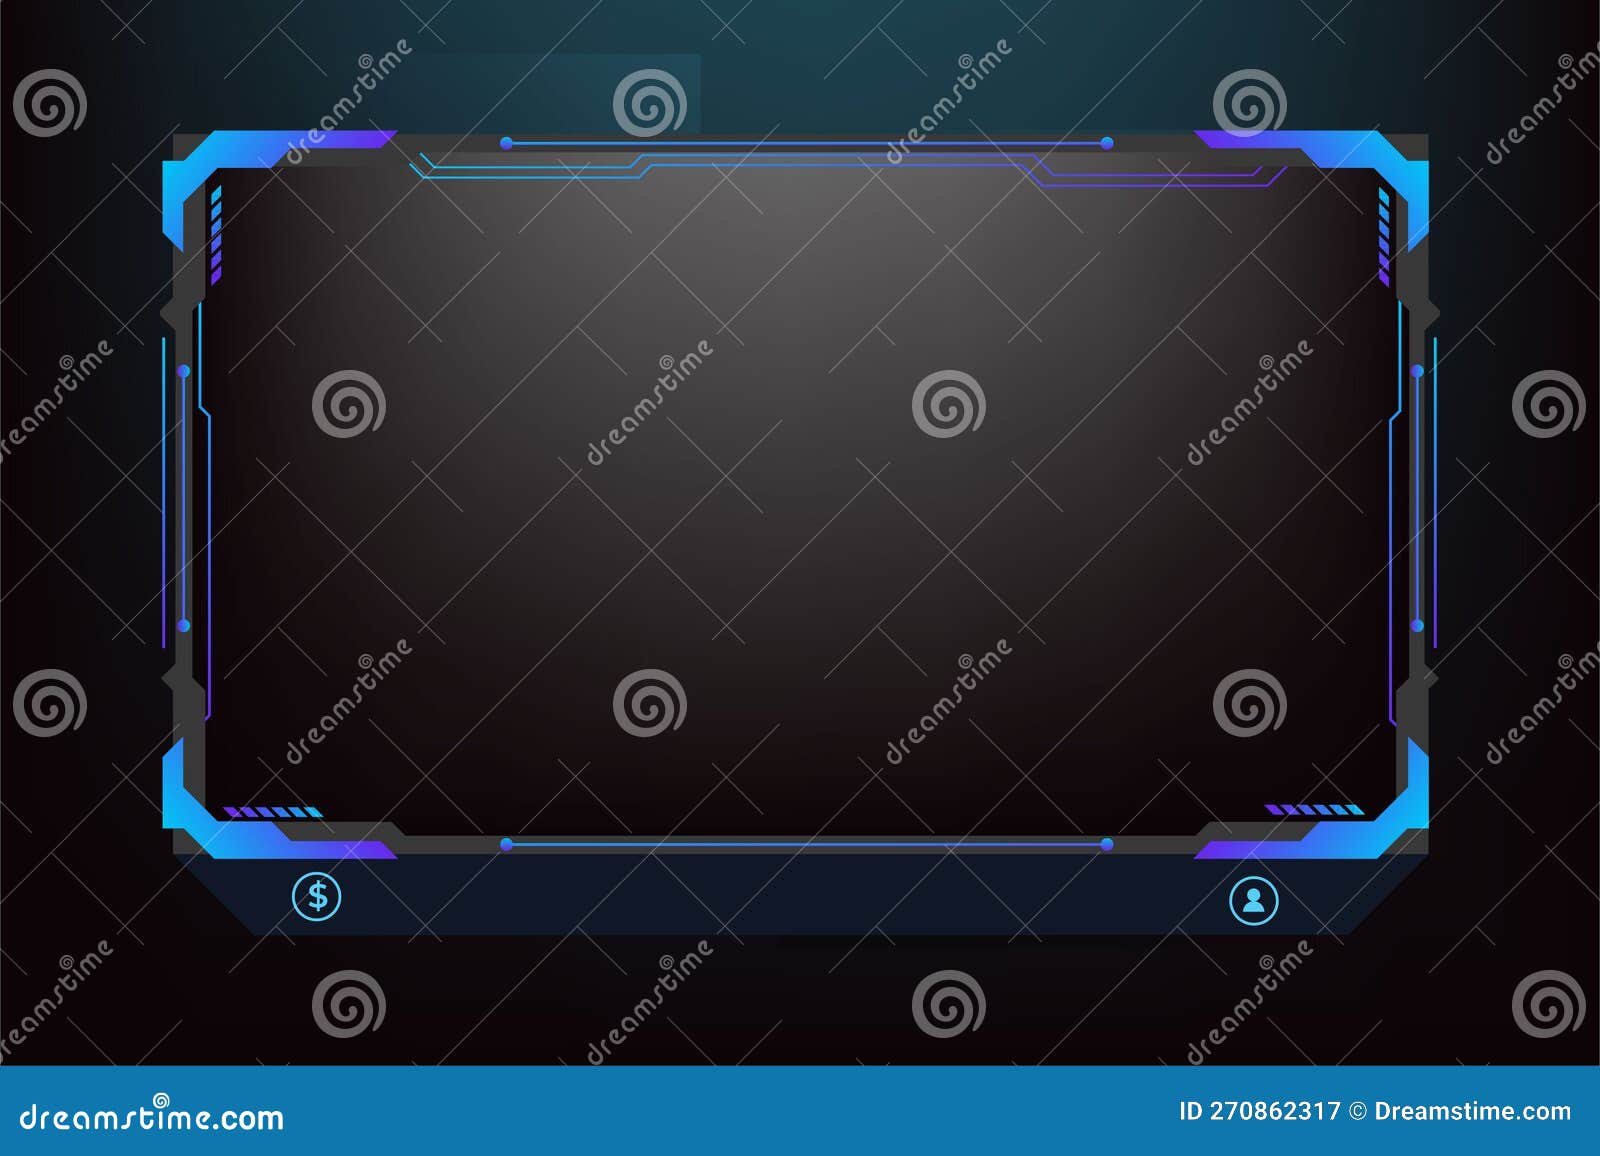 Live Streaming Screen Panel Decoration with Blue and Dark Colors